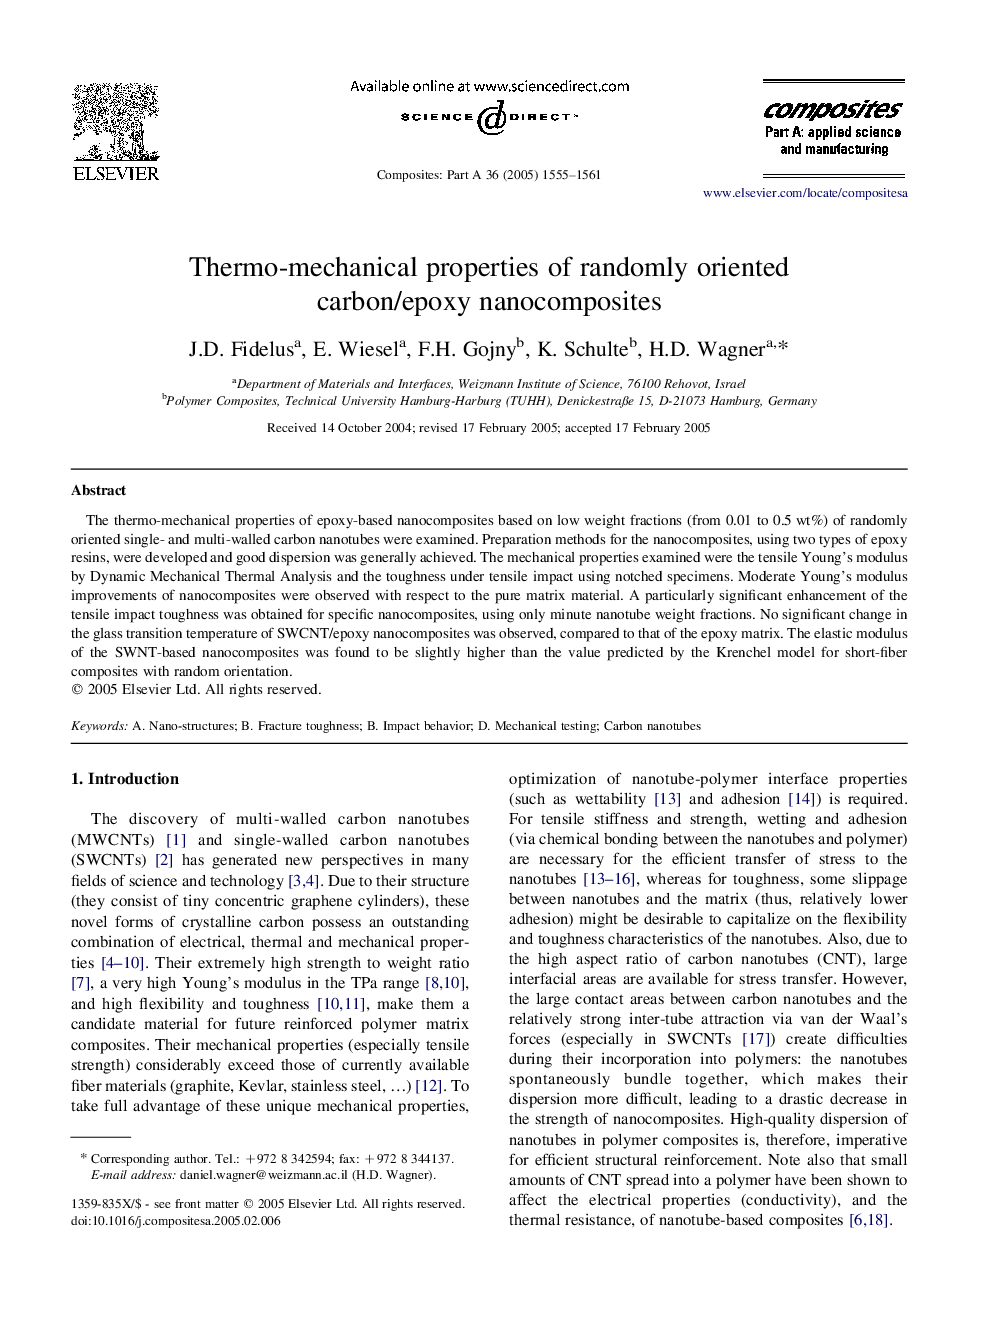 Thermo-mechanical properties of randomly oriented carbon/epoxy nanocomposites